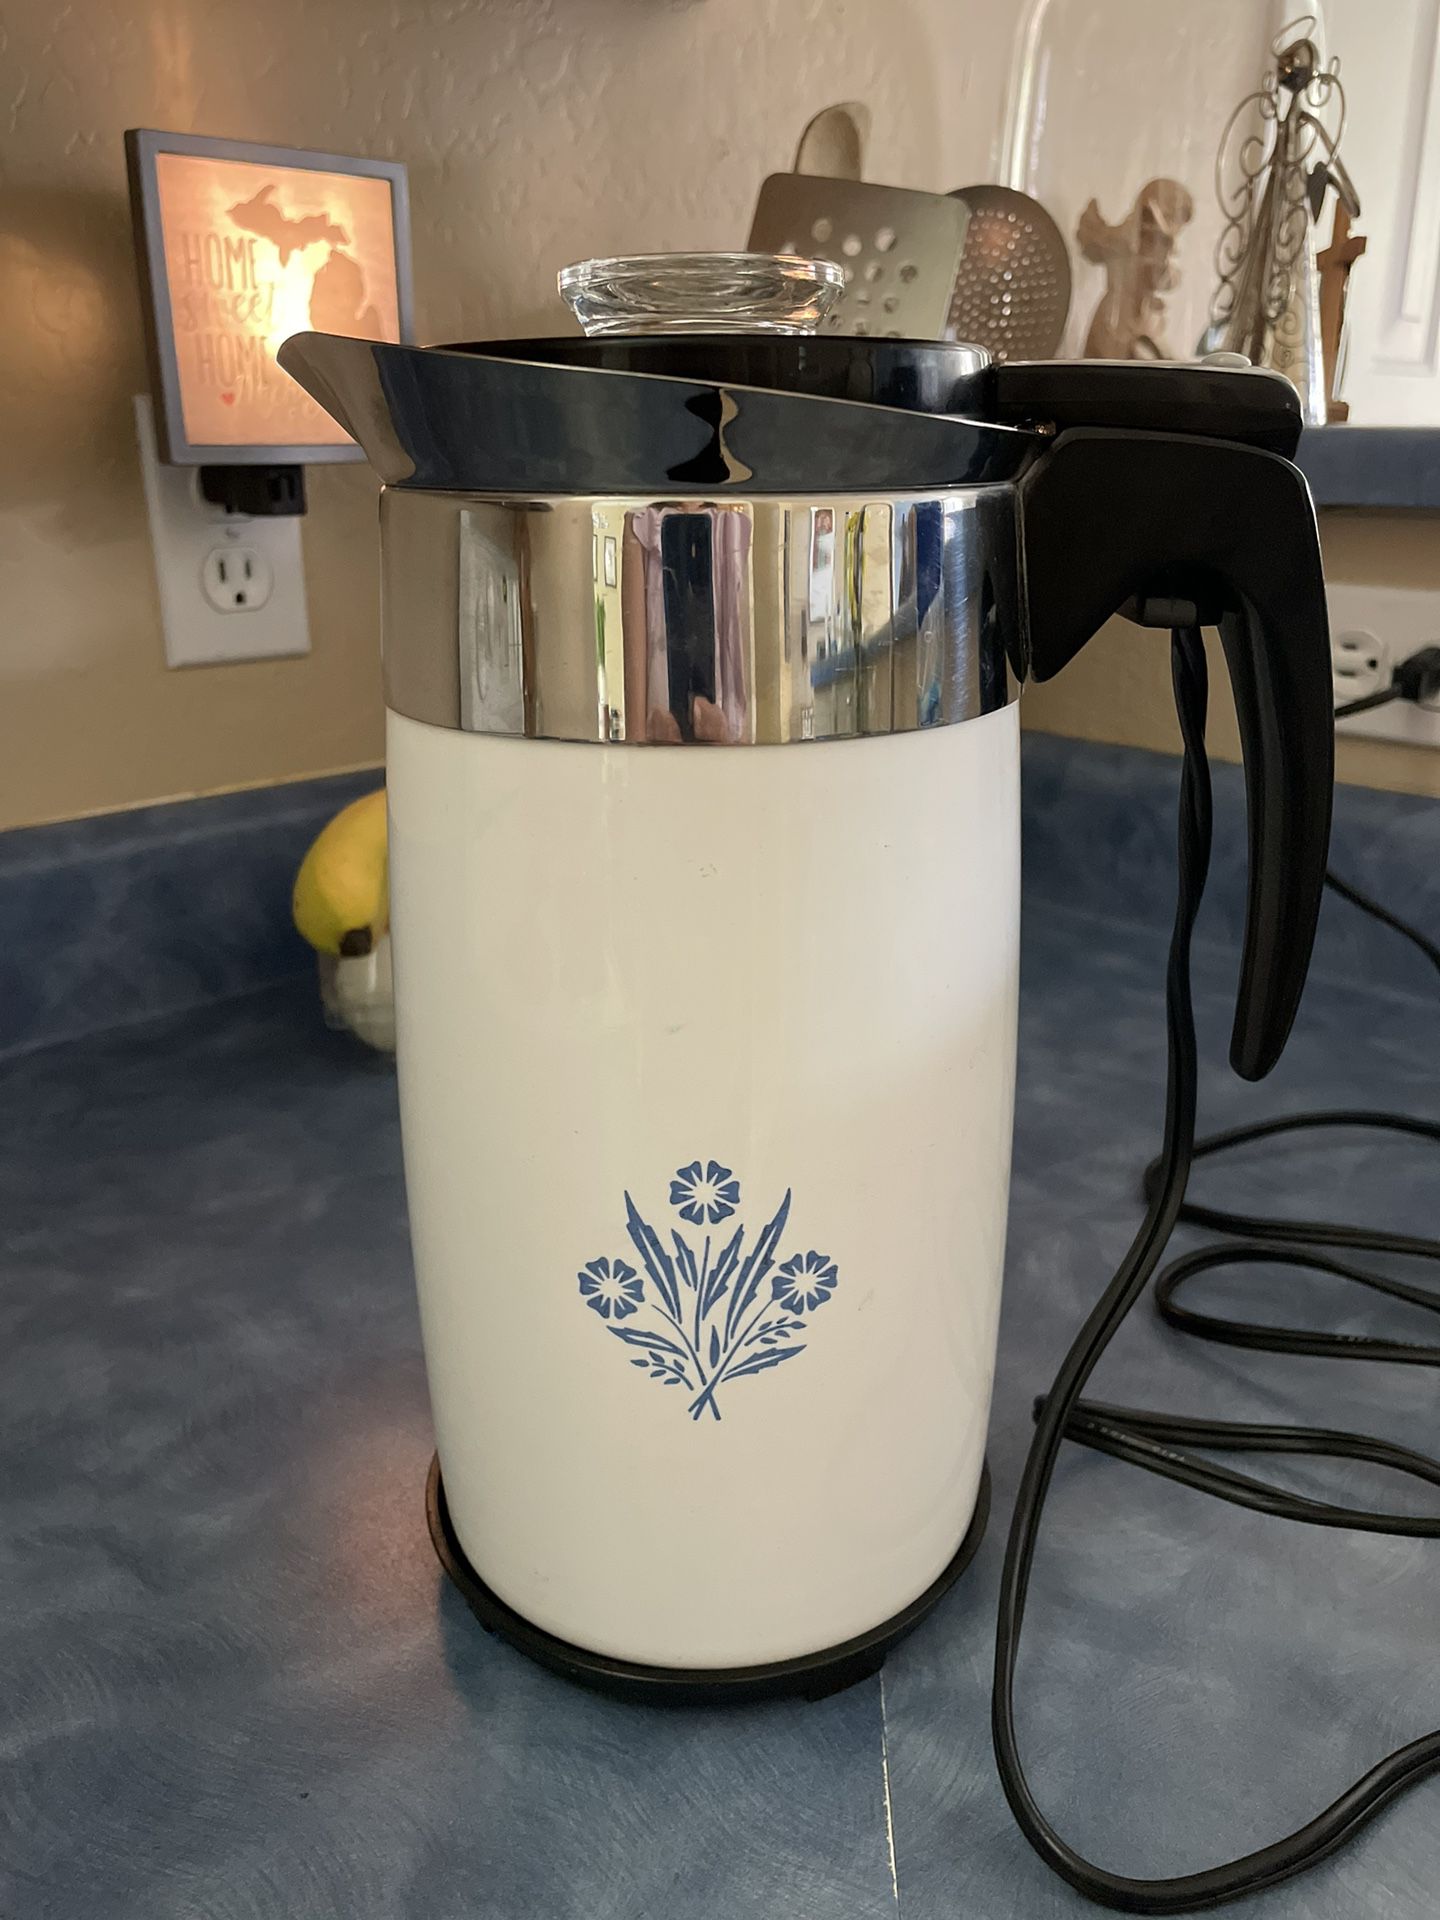 Corning Ware Floral Bouquet Coffee Percolator 9 Cup for Sale in Milpitas,  CA - OfferUp